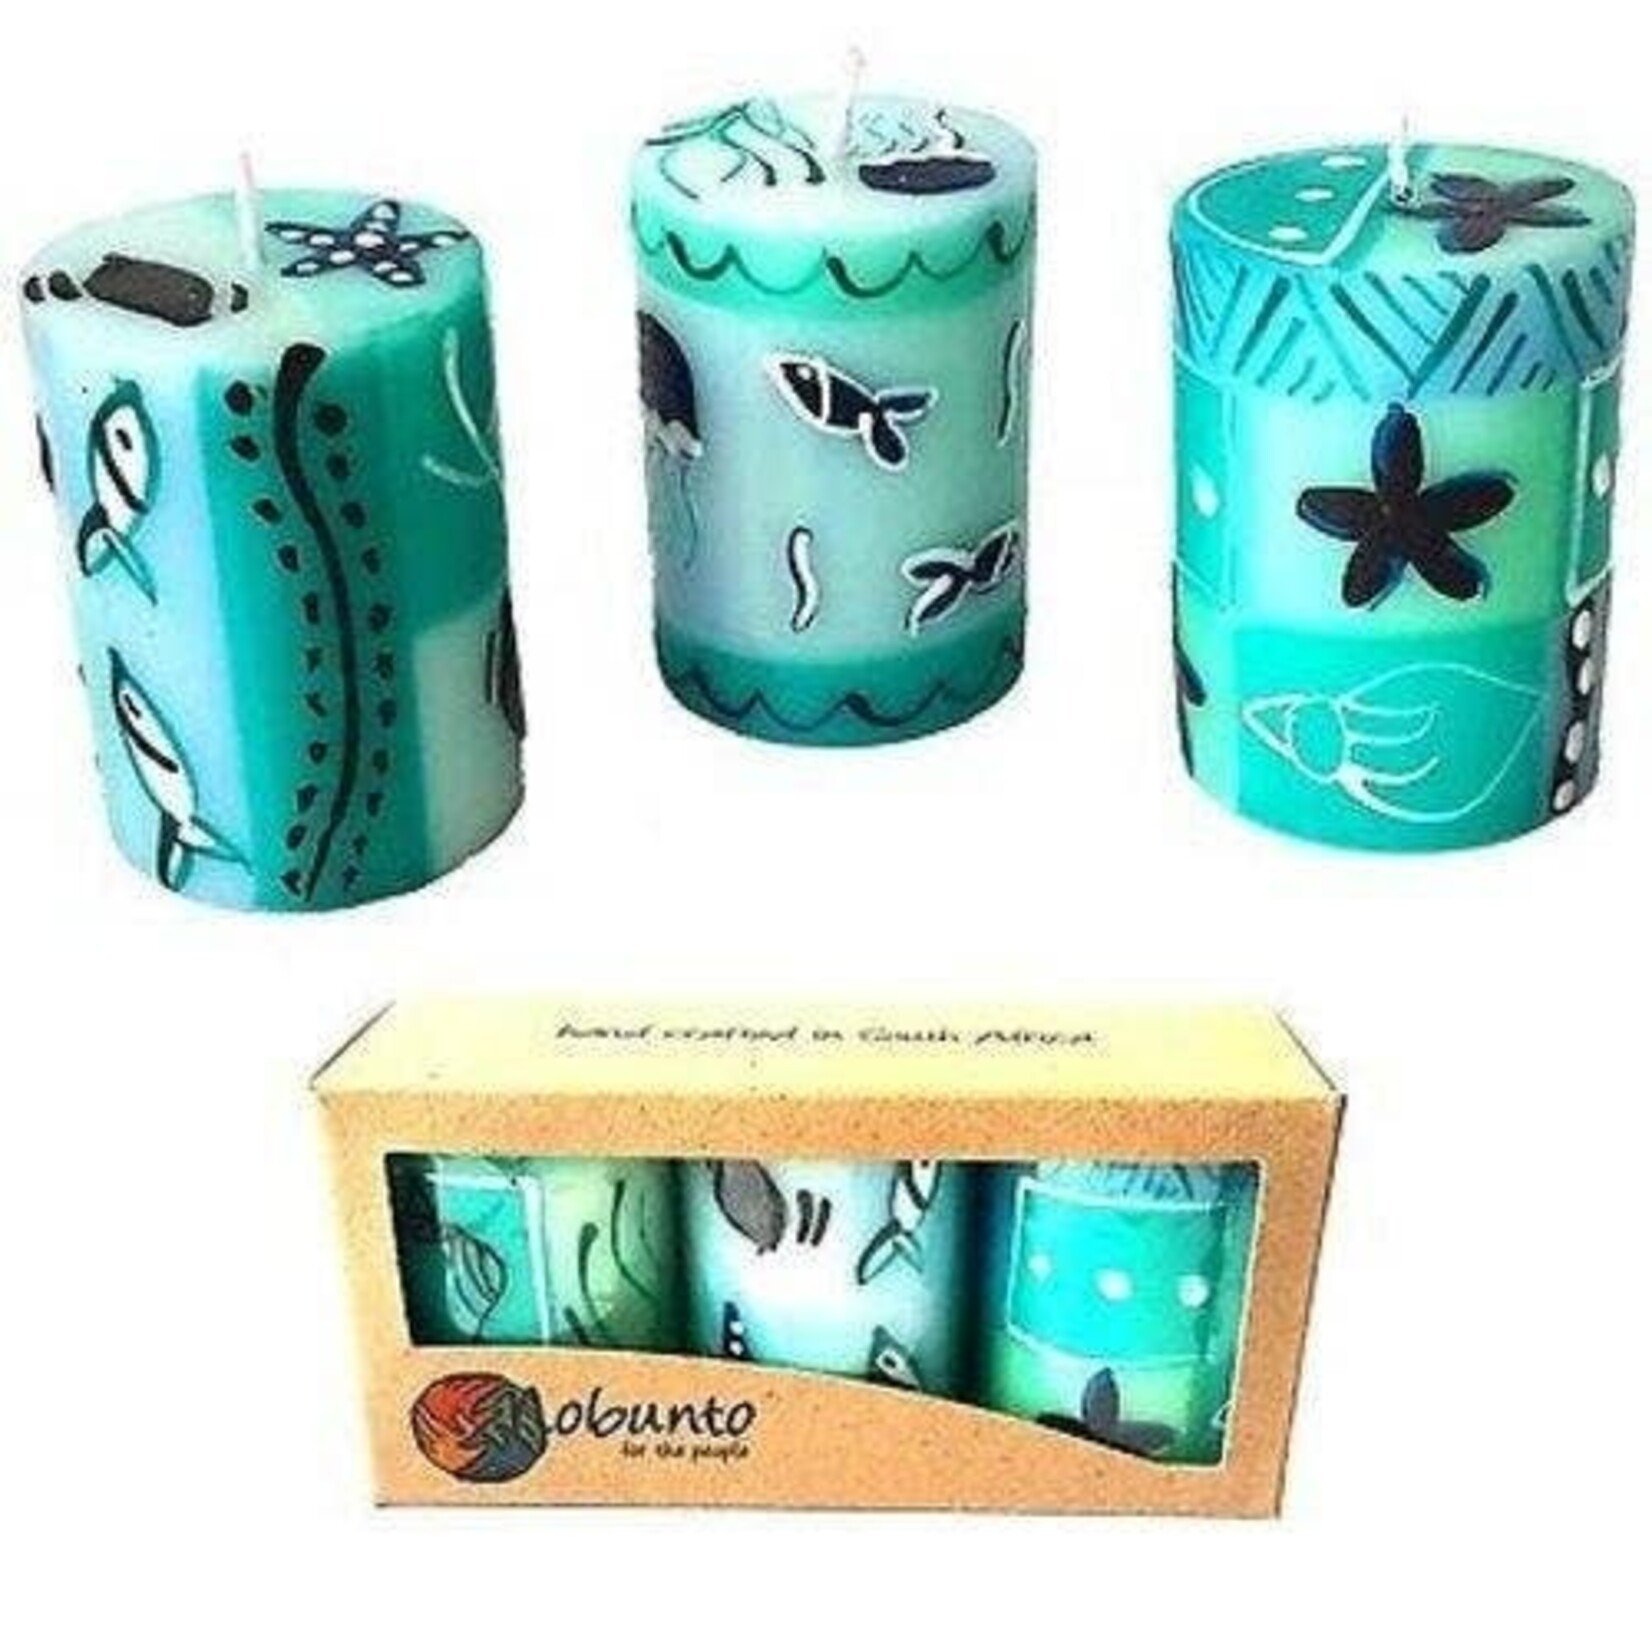 Global Crafts Hand Painted Votive Candles Set of 3 - Samaki Design, South Africa